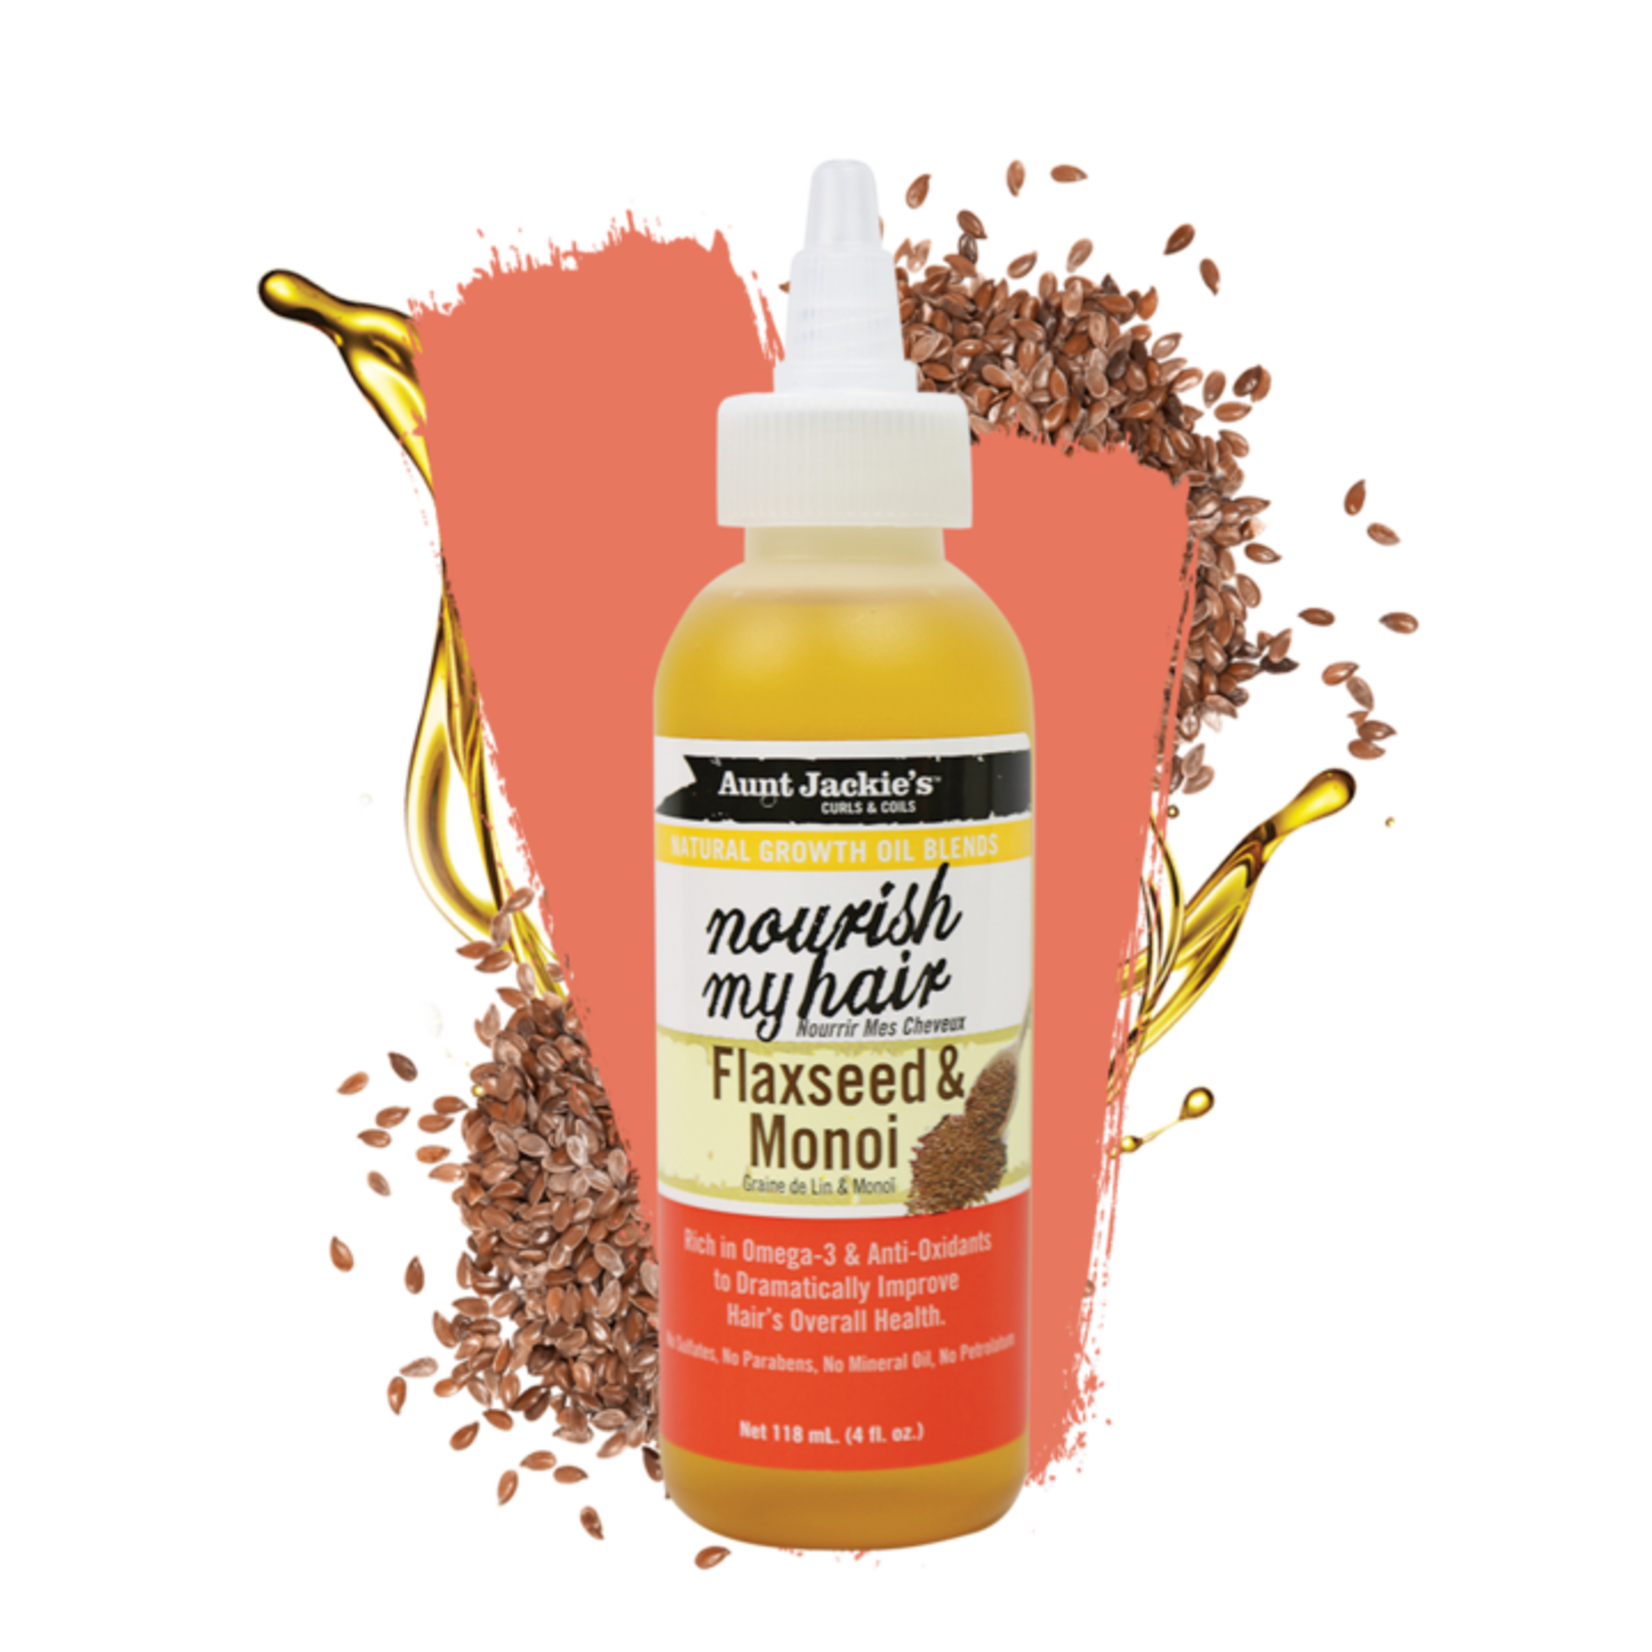 Aunt Jackie's Nourish My Hair! Natural Growth Oil